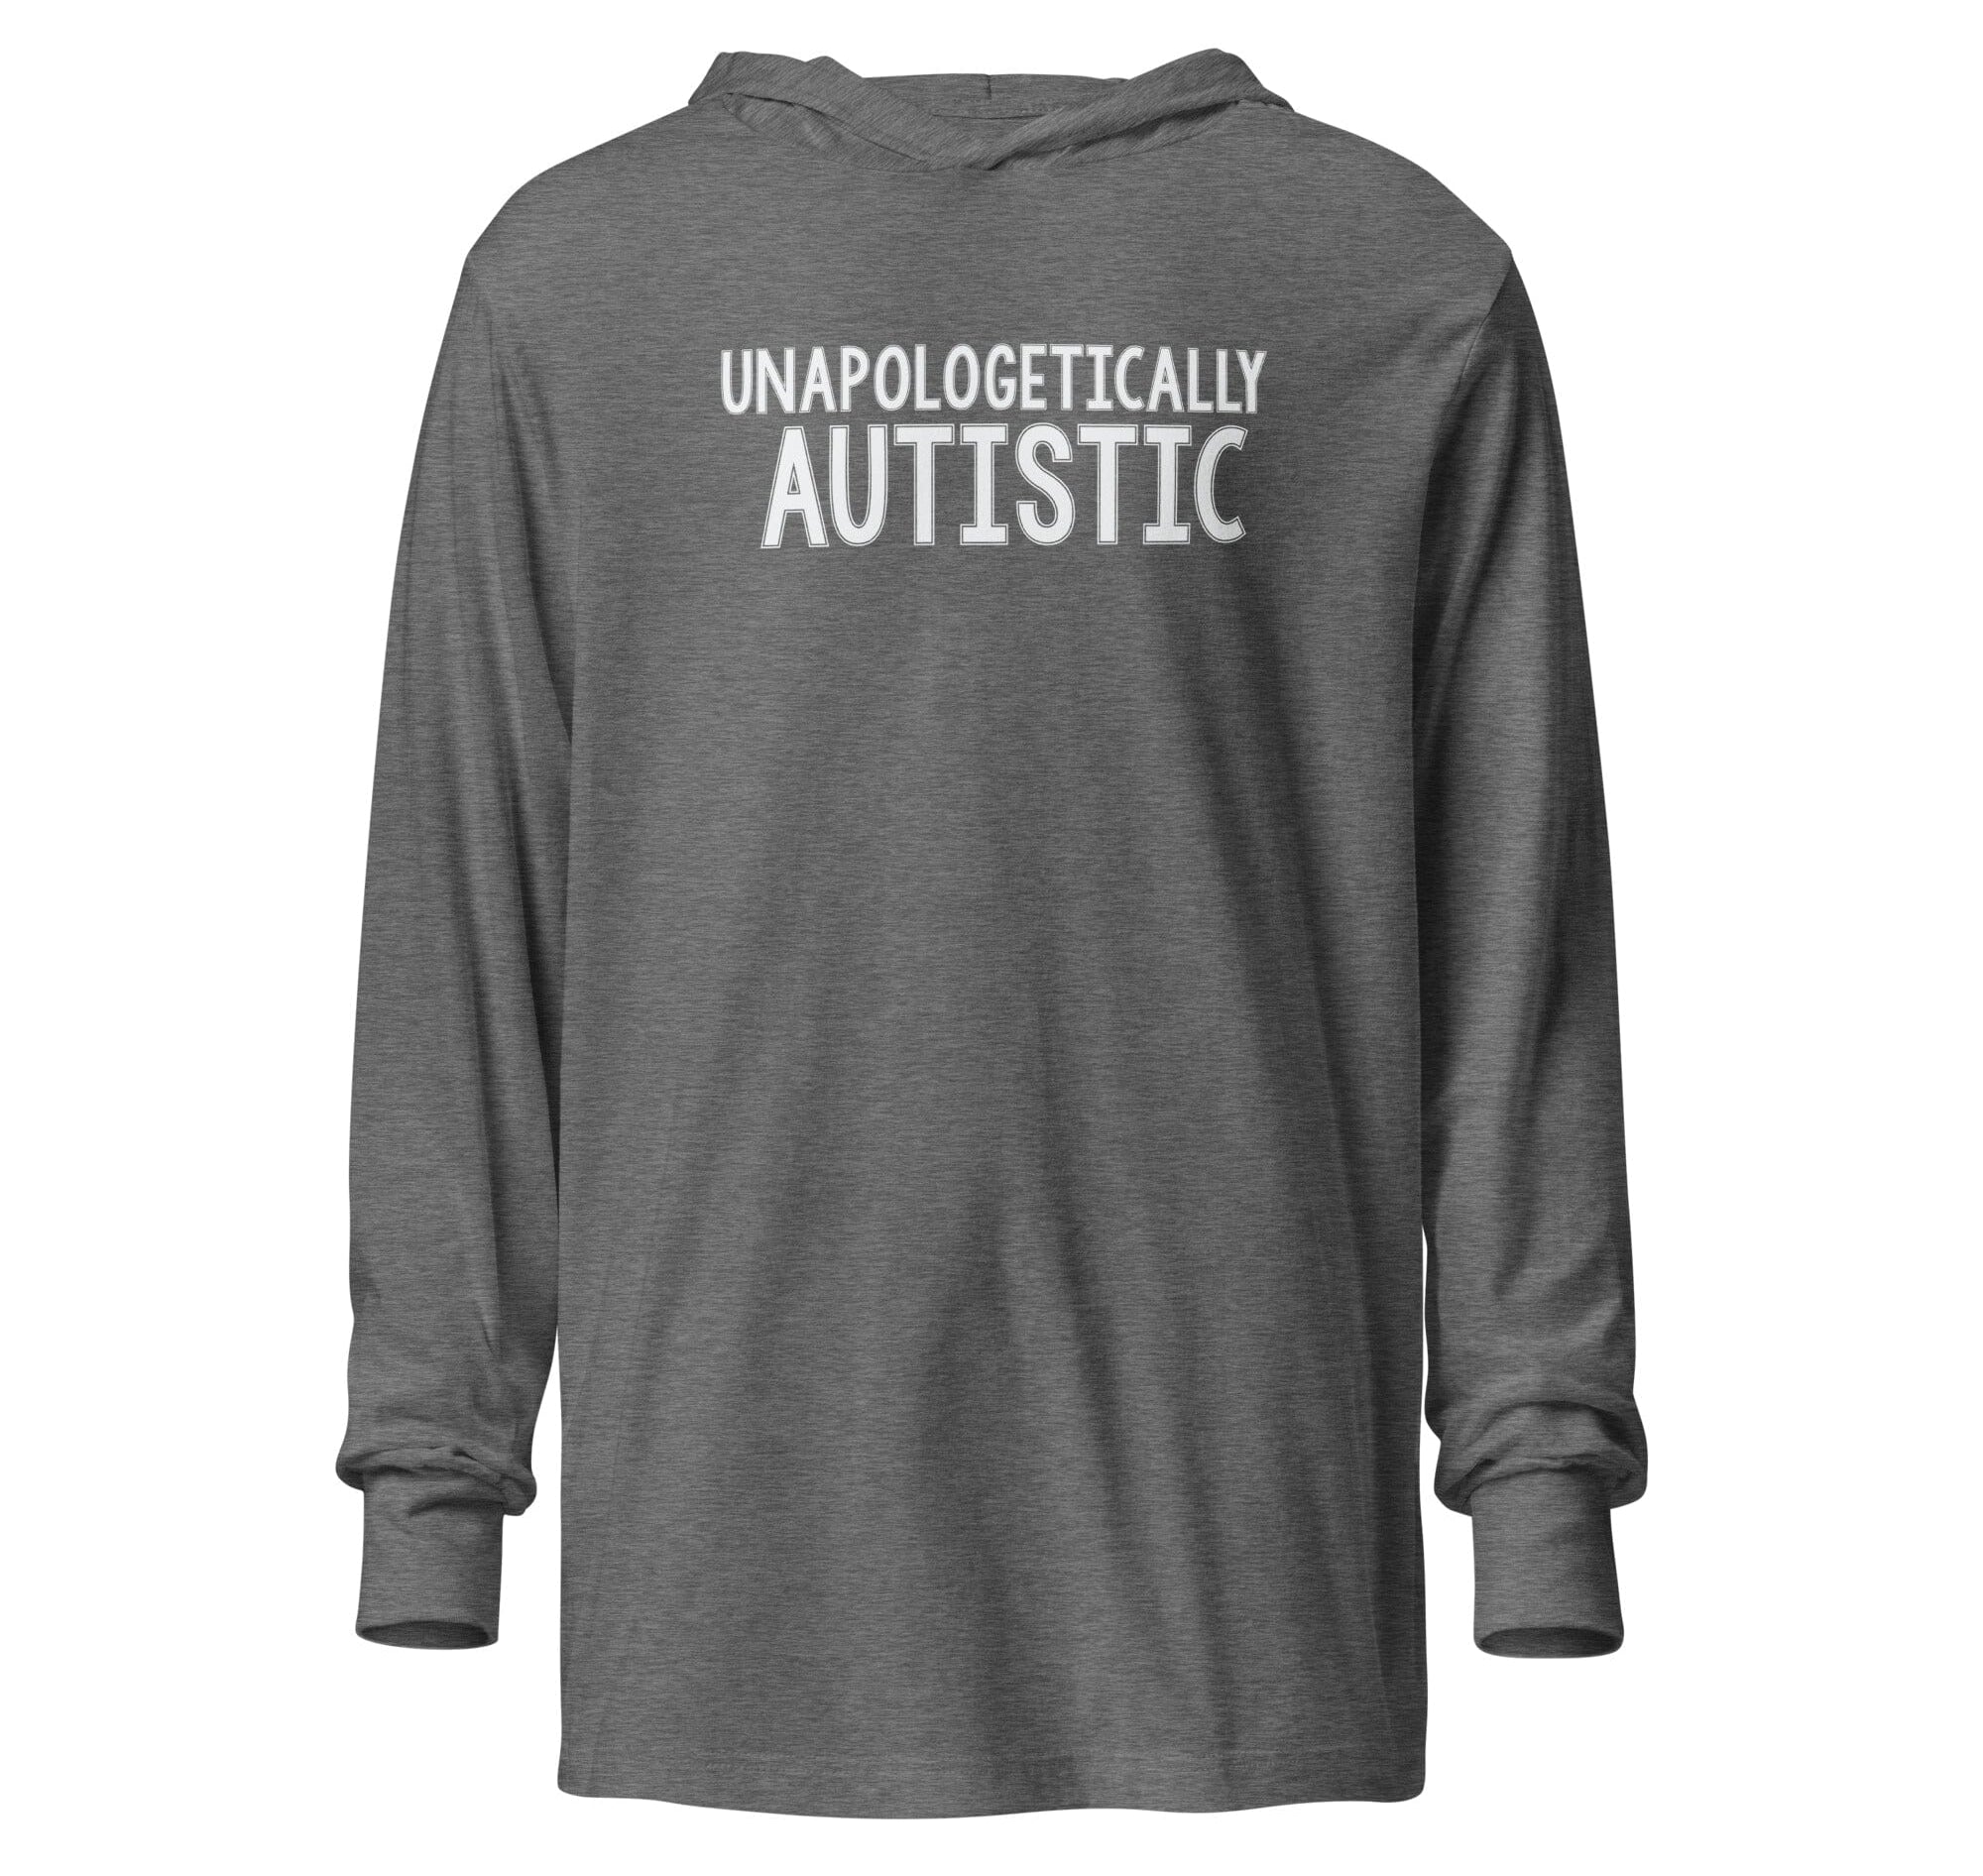 Unapologetically Autistic Unisex Hooded long-sleeve tee The Autistic Innovator Grey Triblend XS 